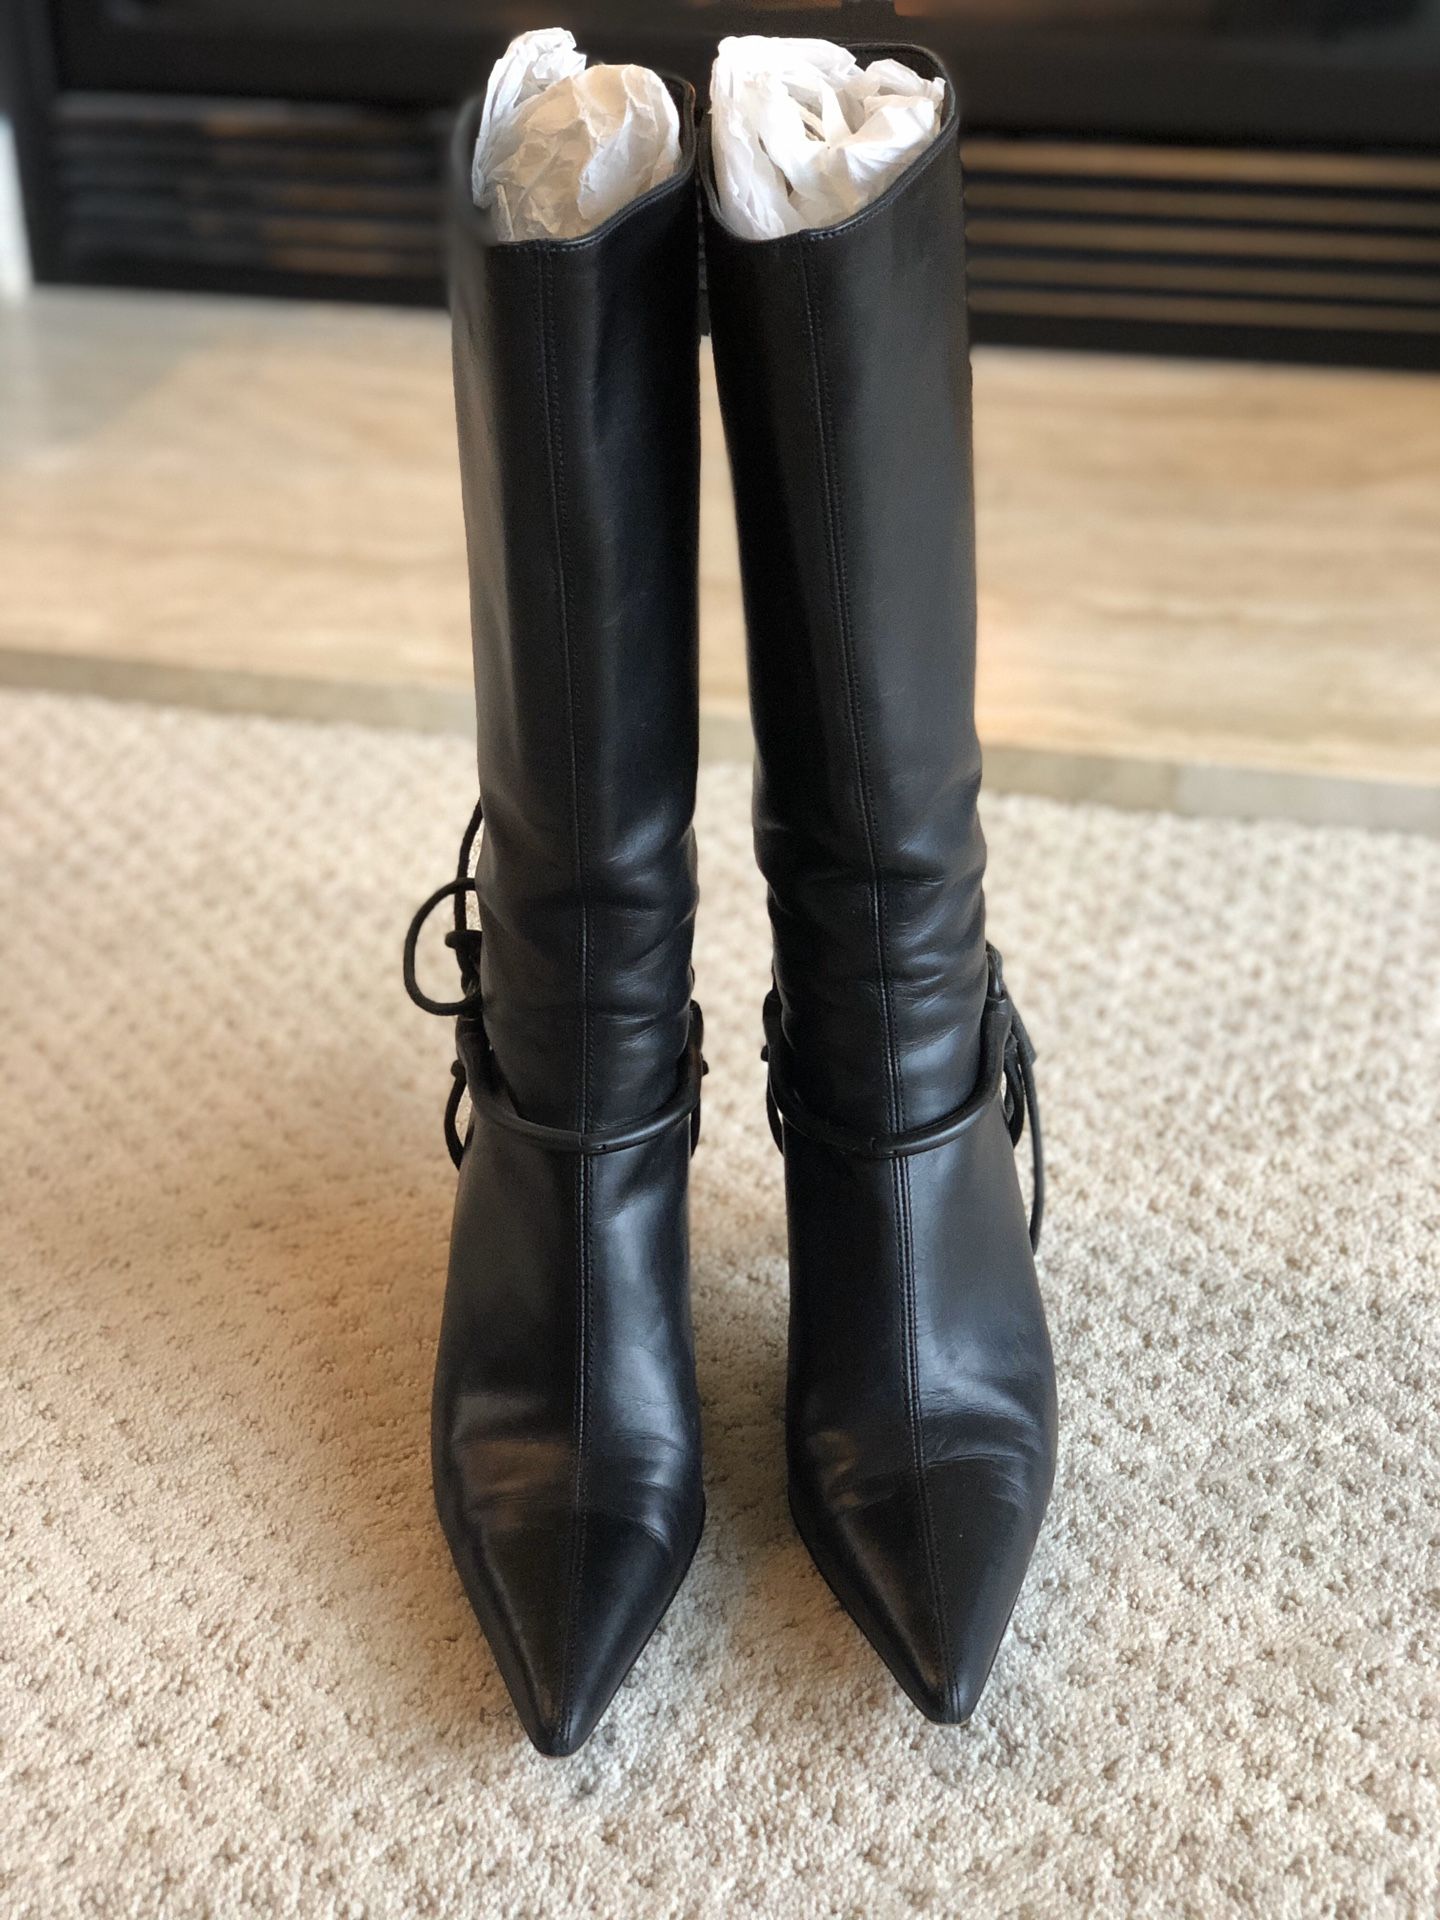 Authentic Gucci black leather boots Size 6